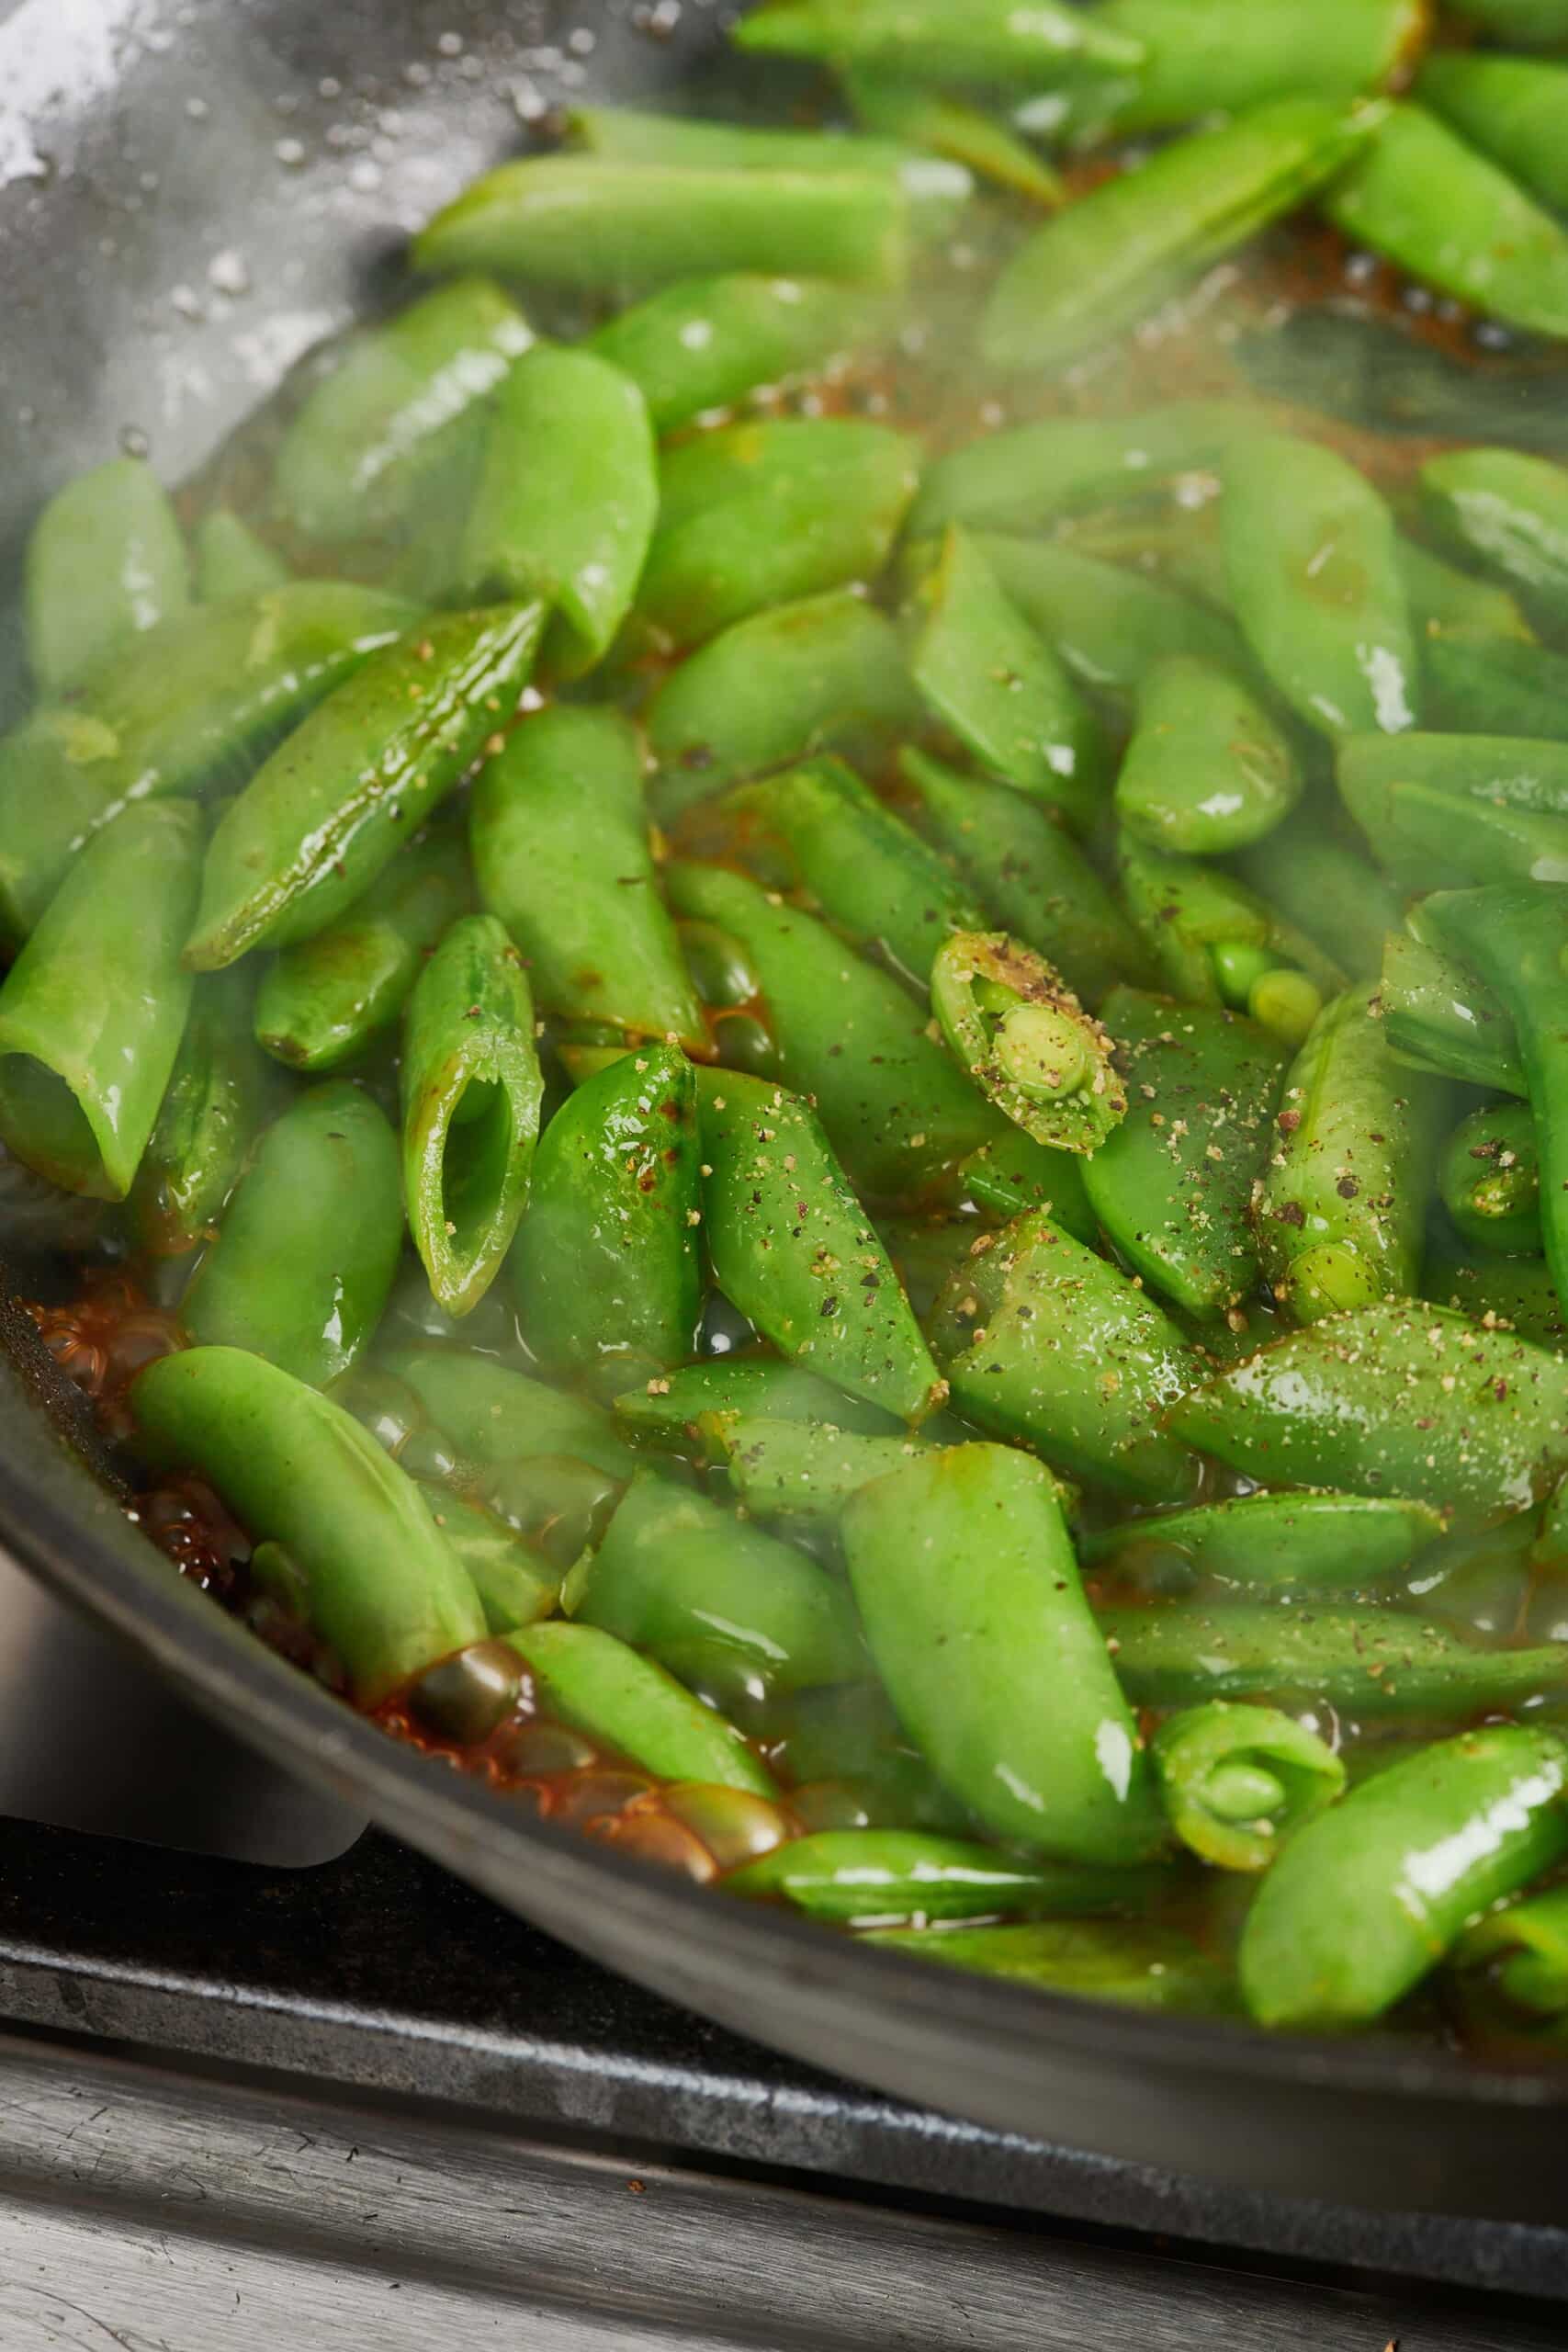 Soy Glazed Sugar Snap Peas sti-fried in pan with pepper.